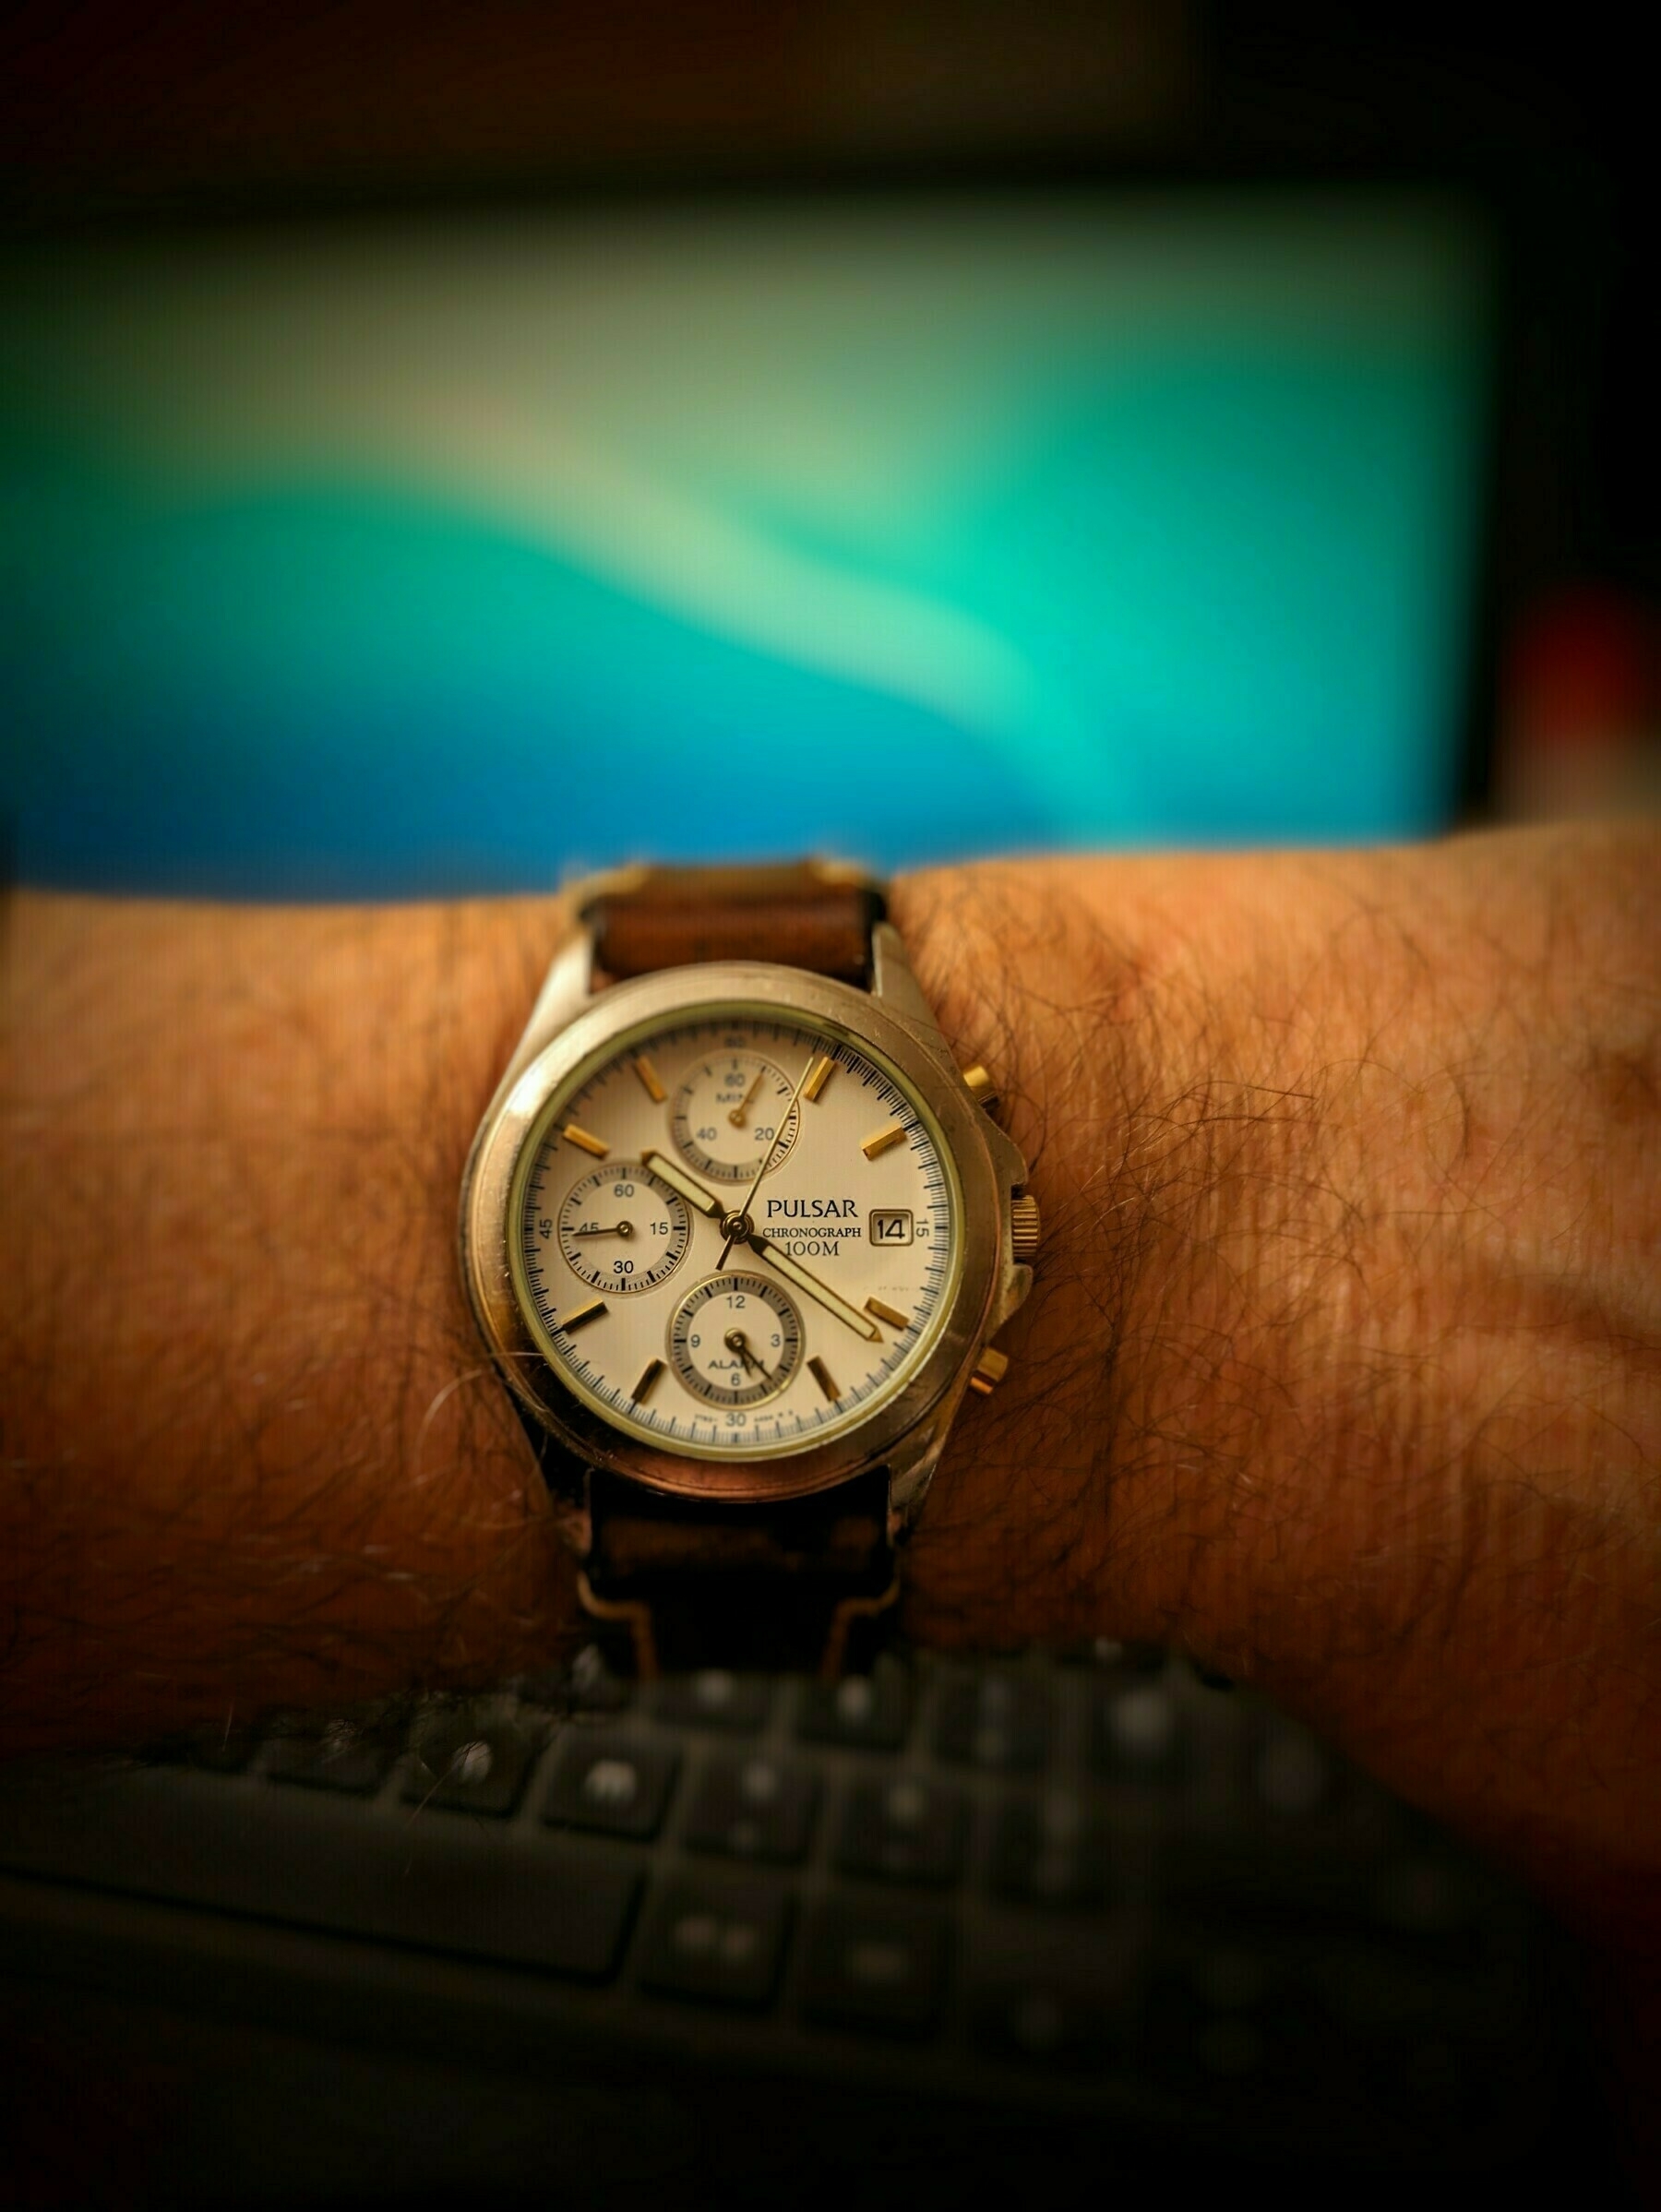 My old Pulsar Chronograph analogue watch on my hairy wrist with a brown leather strap